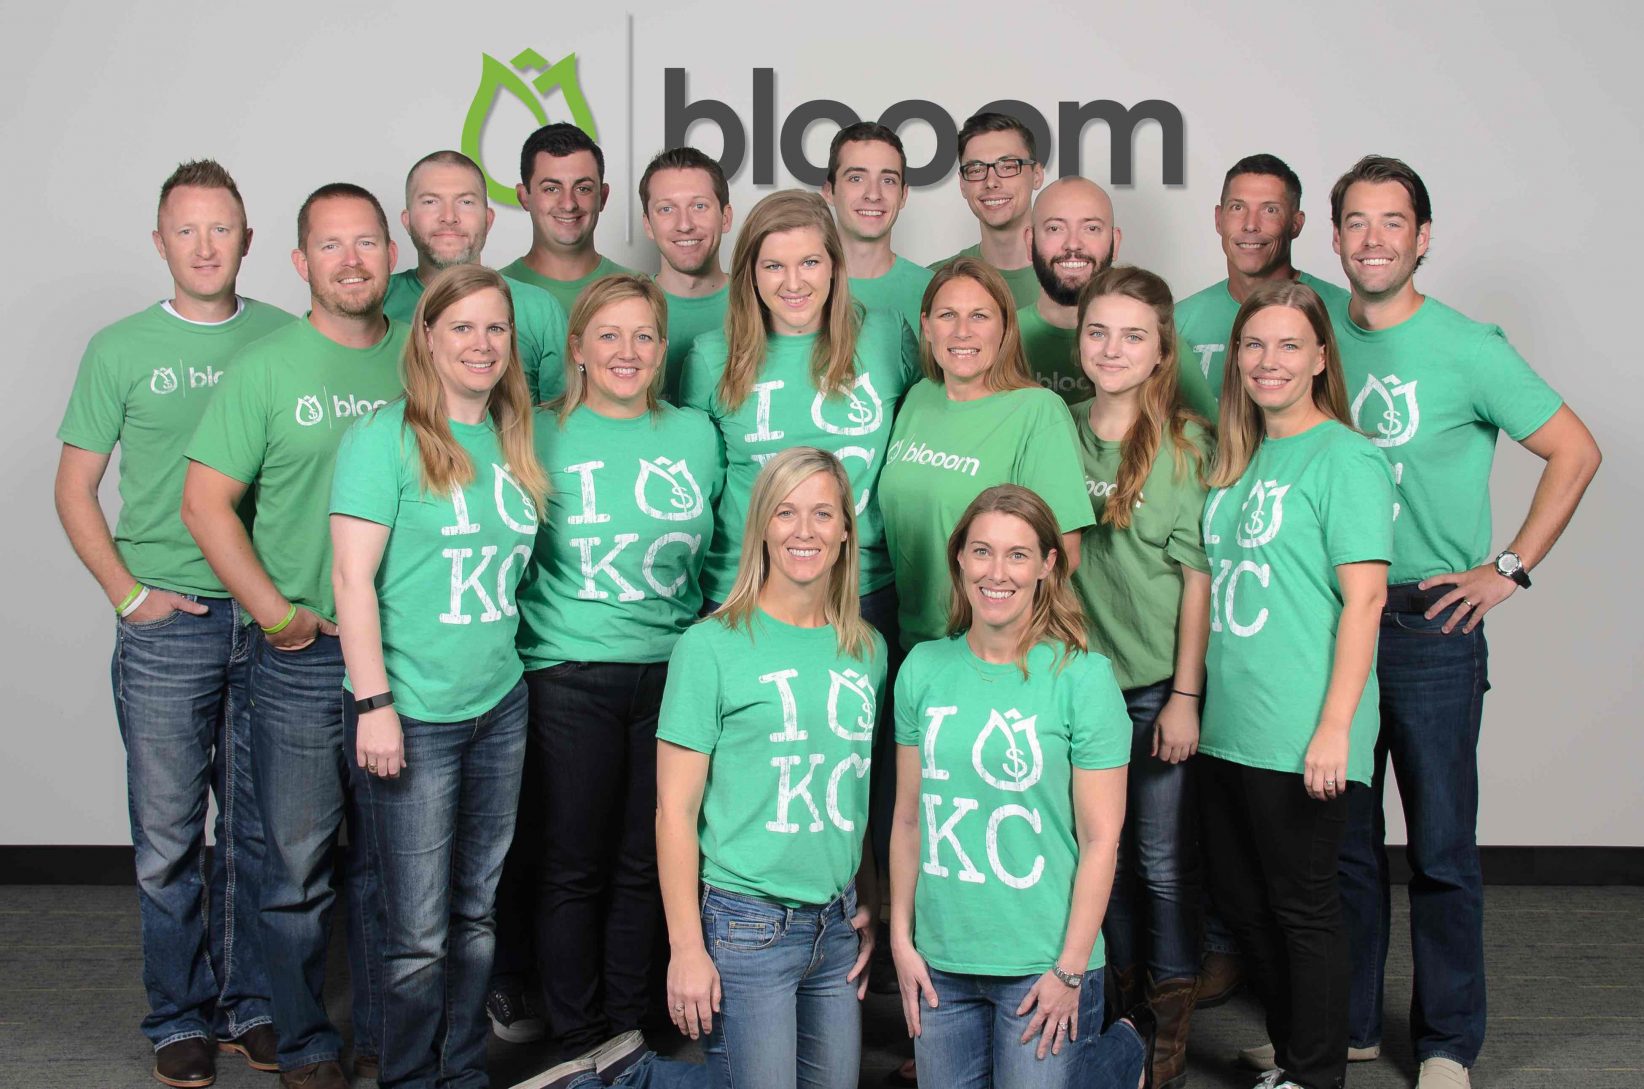 With $300M under management, Blooom is the fastest-growing robo advisor